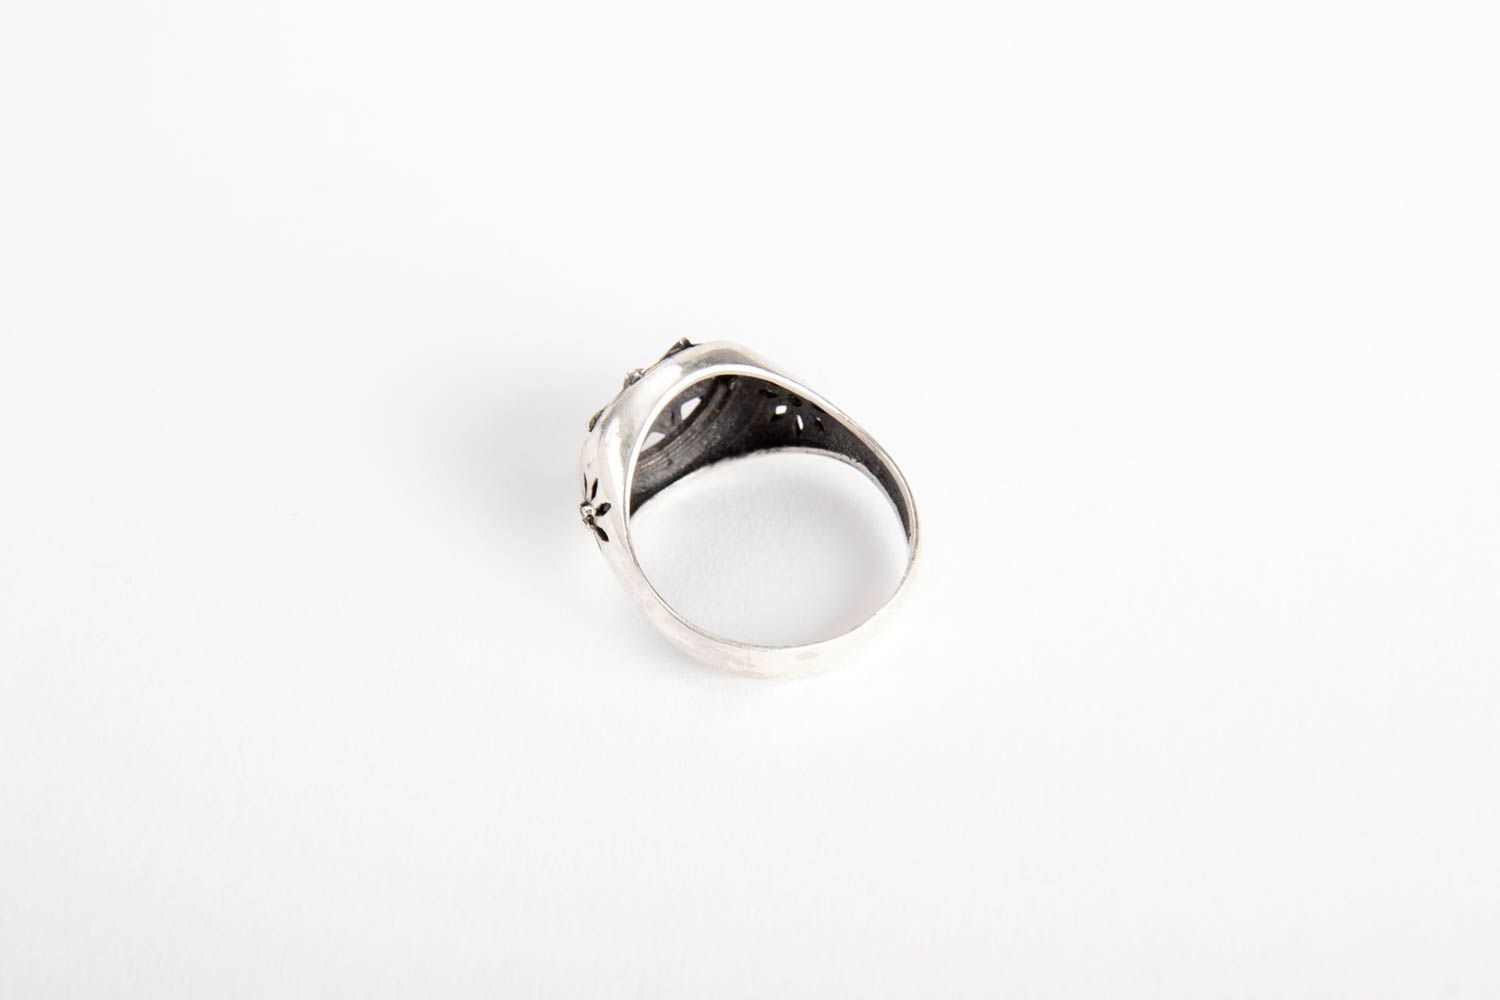 Handmade silver ring designer ring for men unusual gift silver accessories photo 3